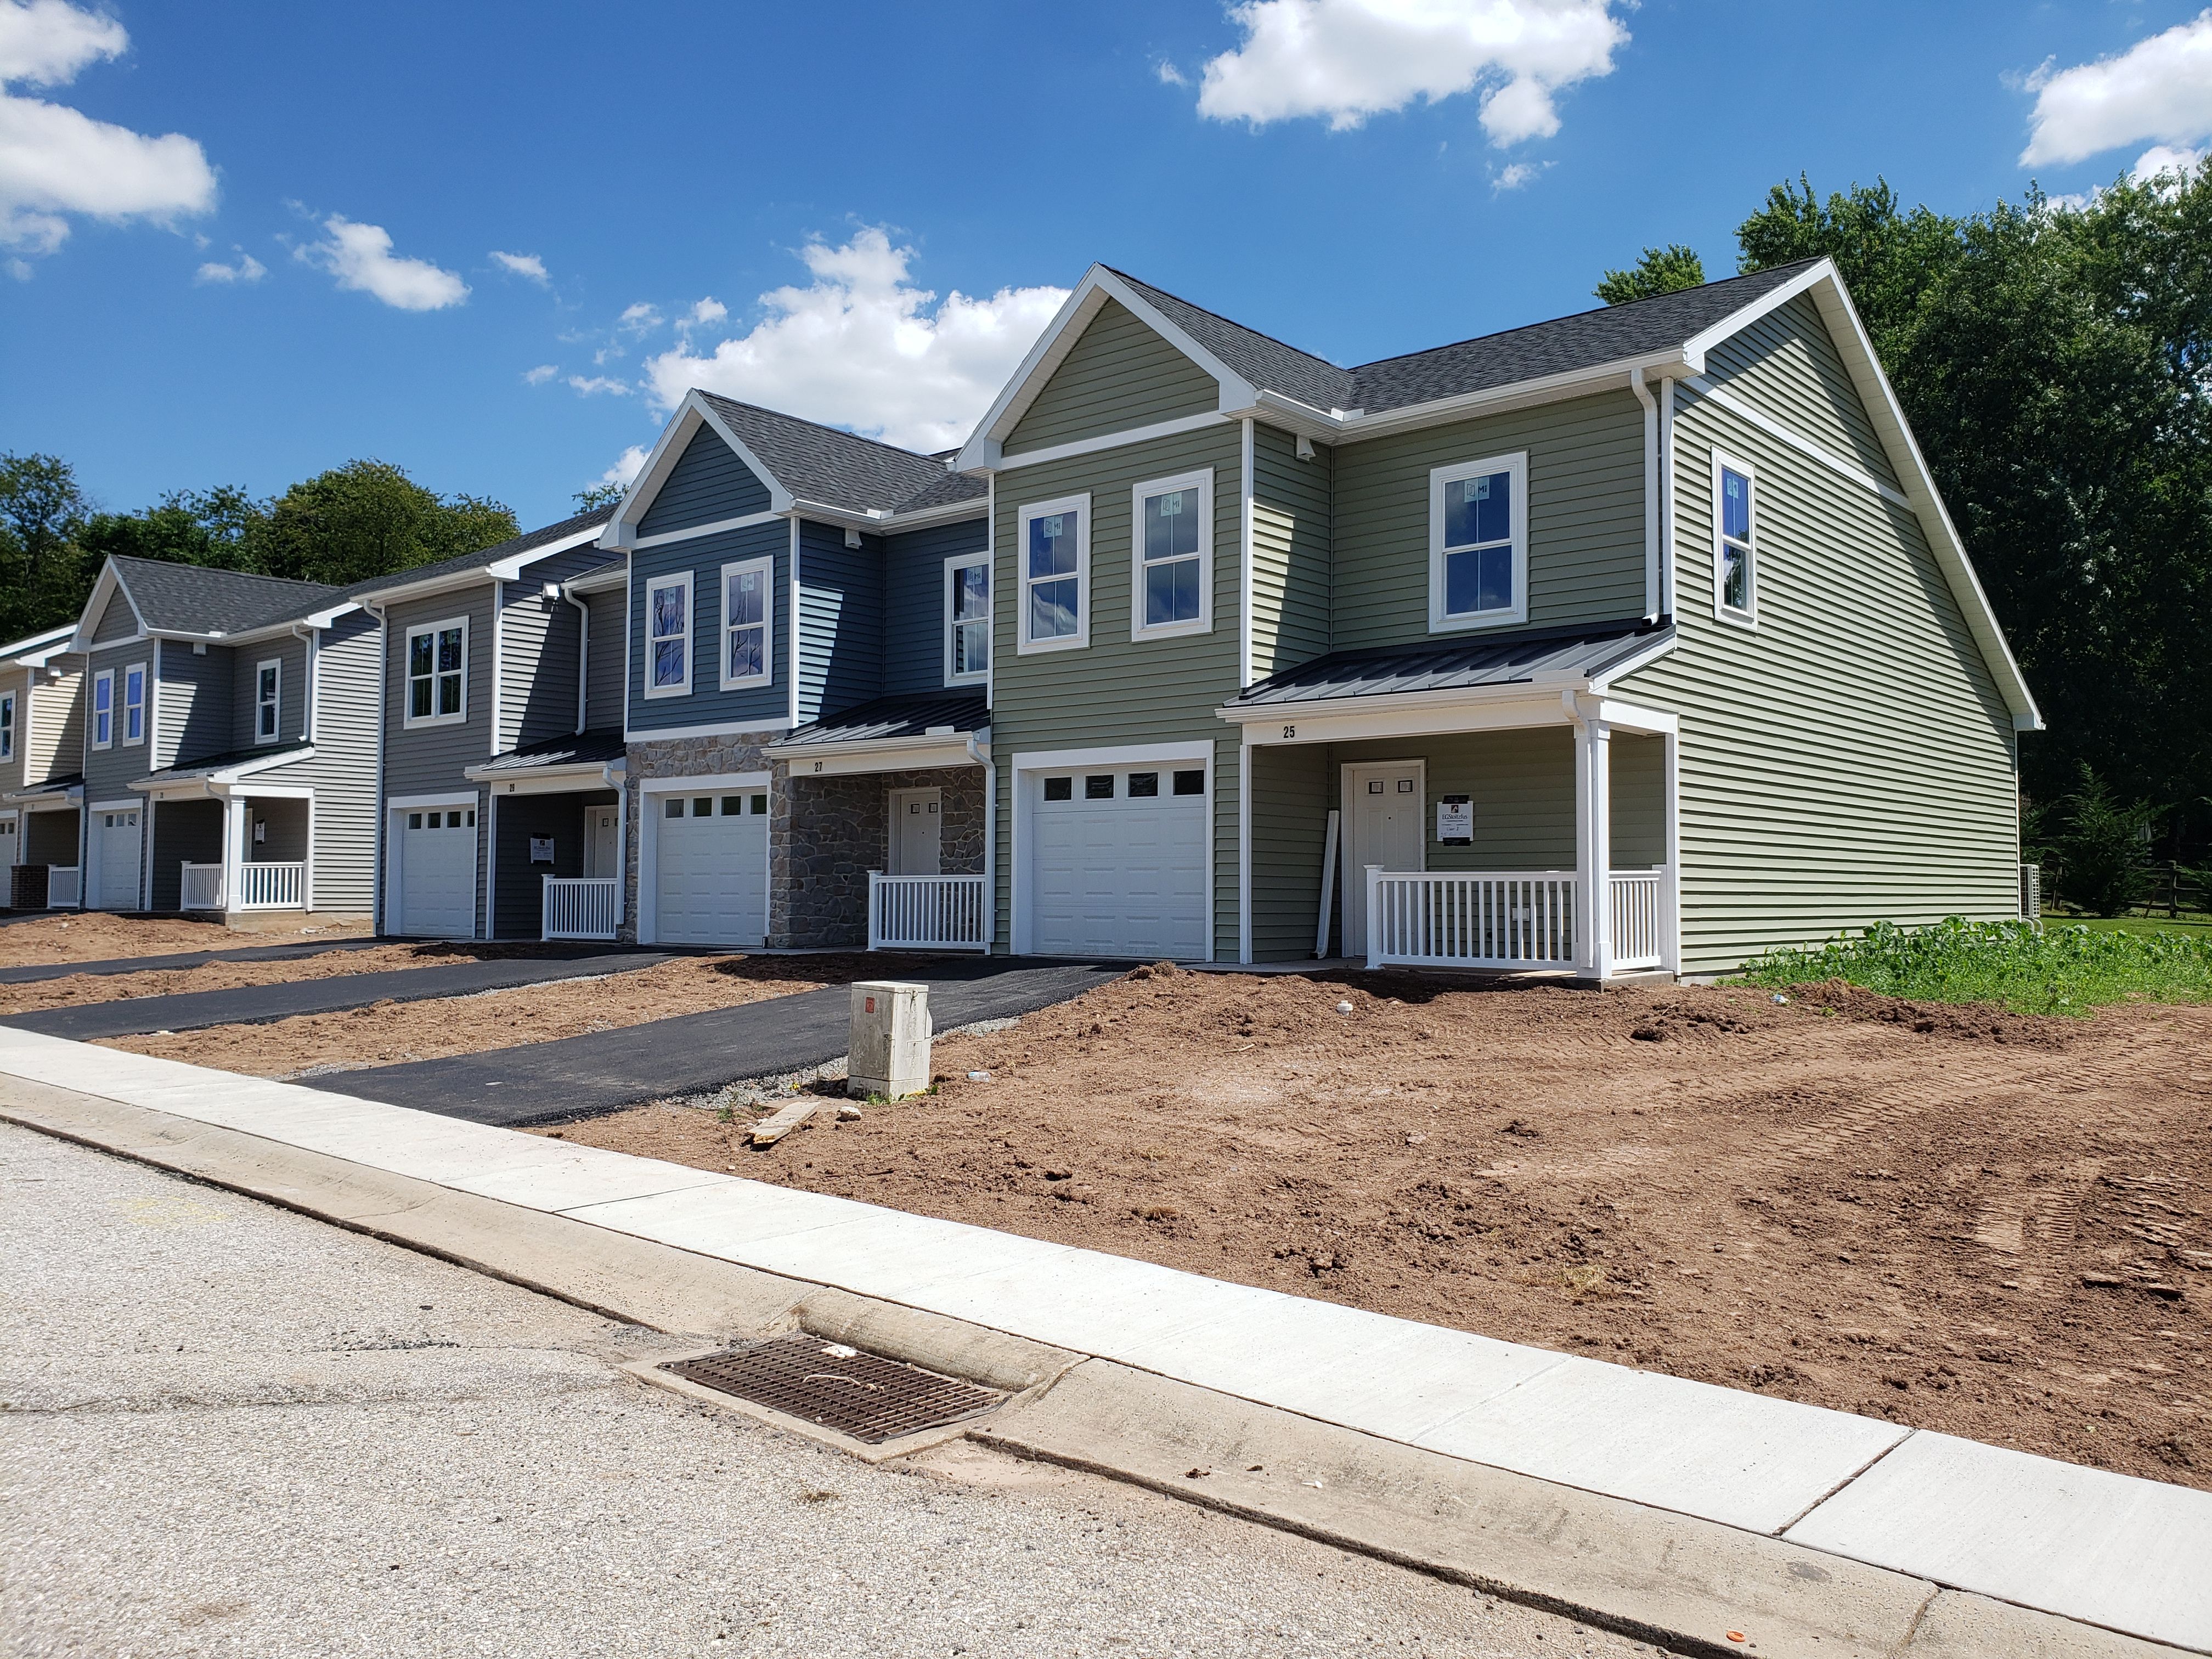 Meadow View Townhomes